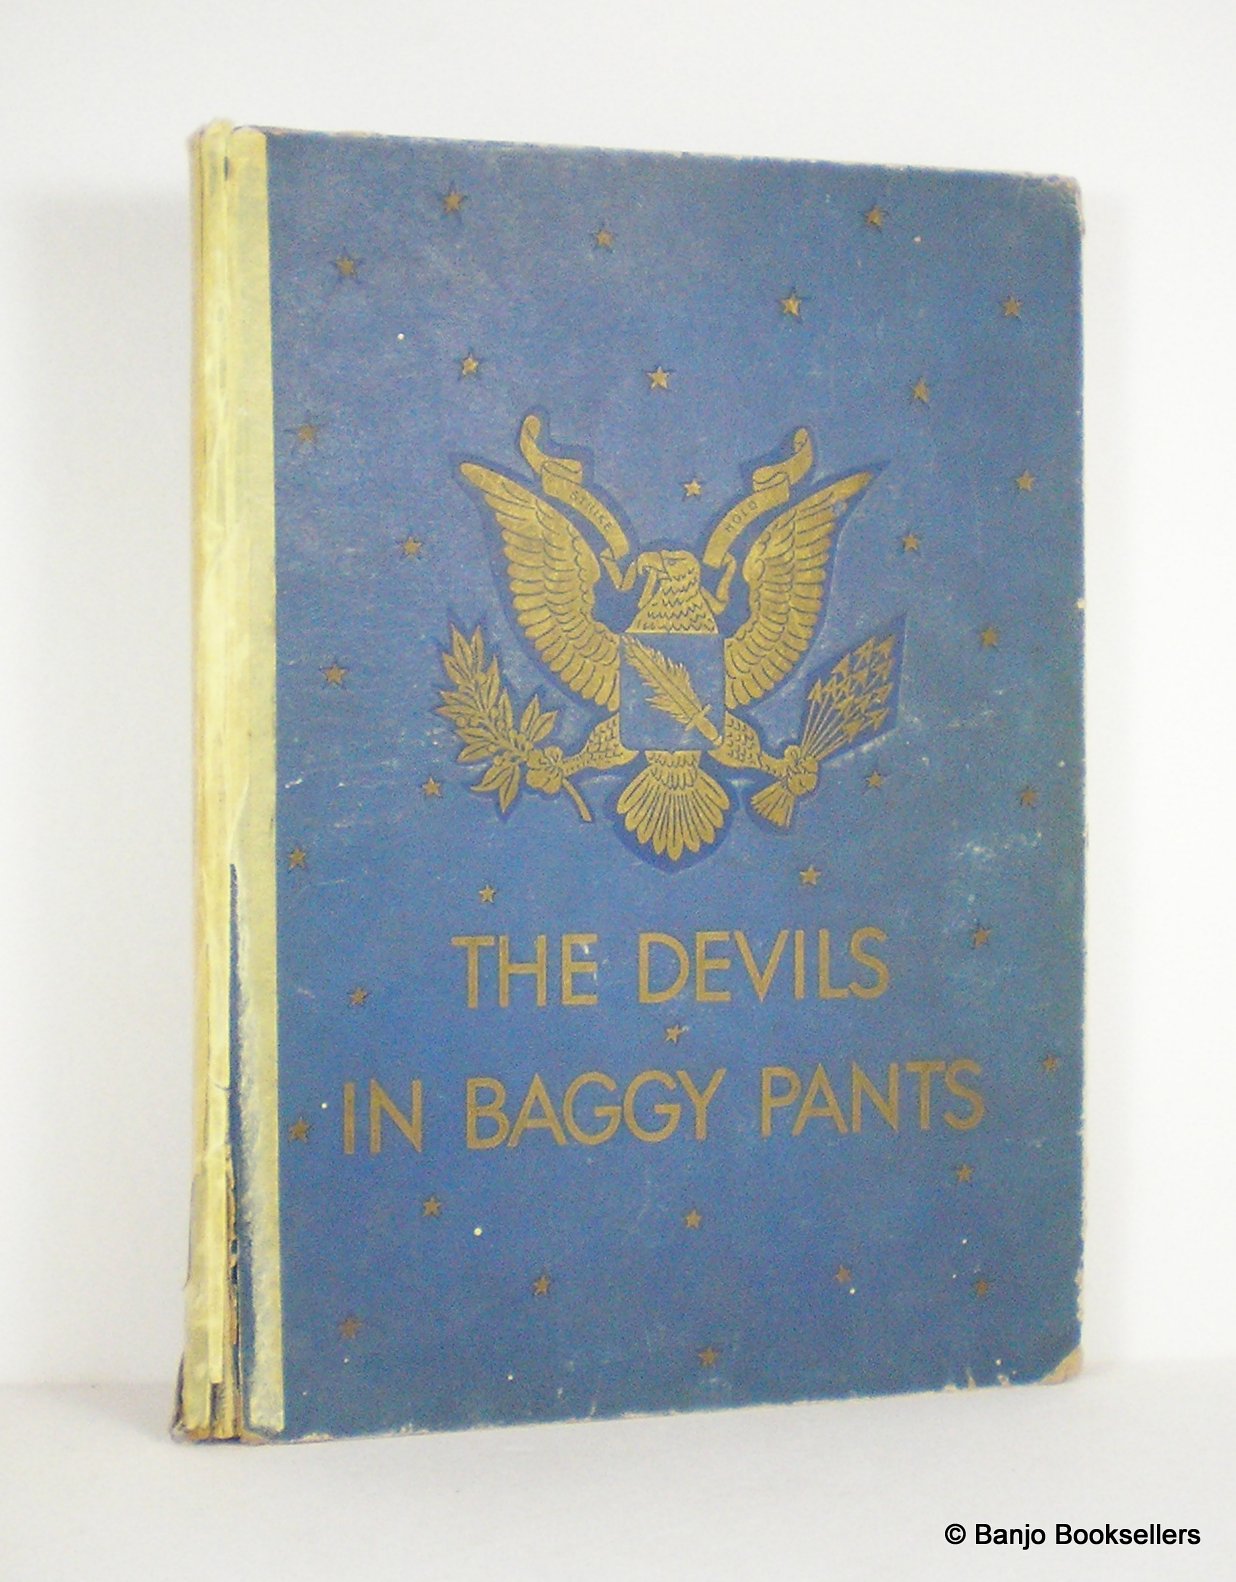 The Devils in Baggy Pants: Combat Record of the 504th Parachute Regiment  April 1943 to July 1945 by Mandle, Lt. William D.; Whittier, Pfc David H.:  Poor Hardcover (1945)